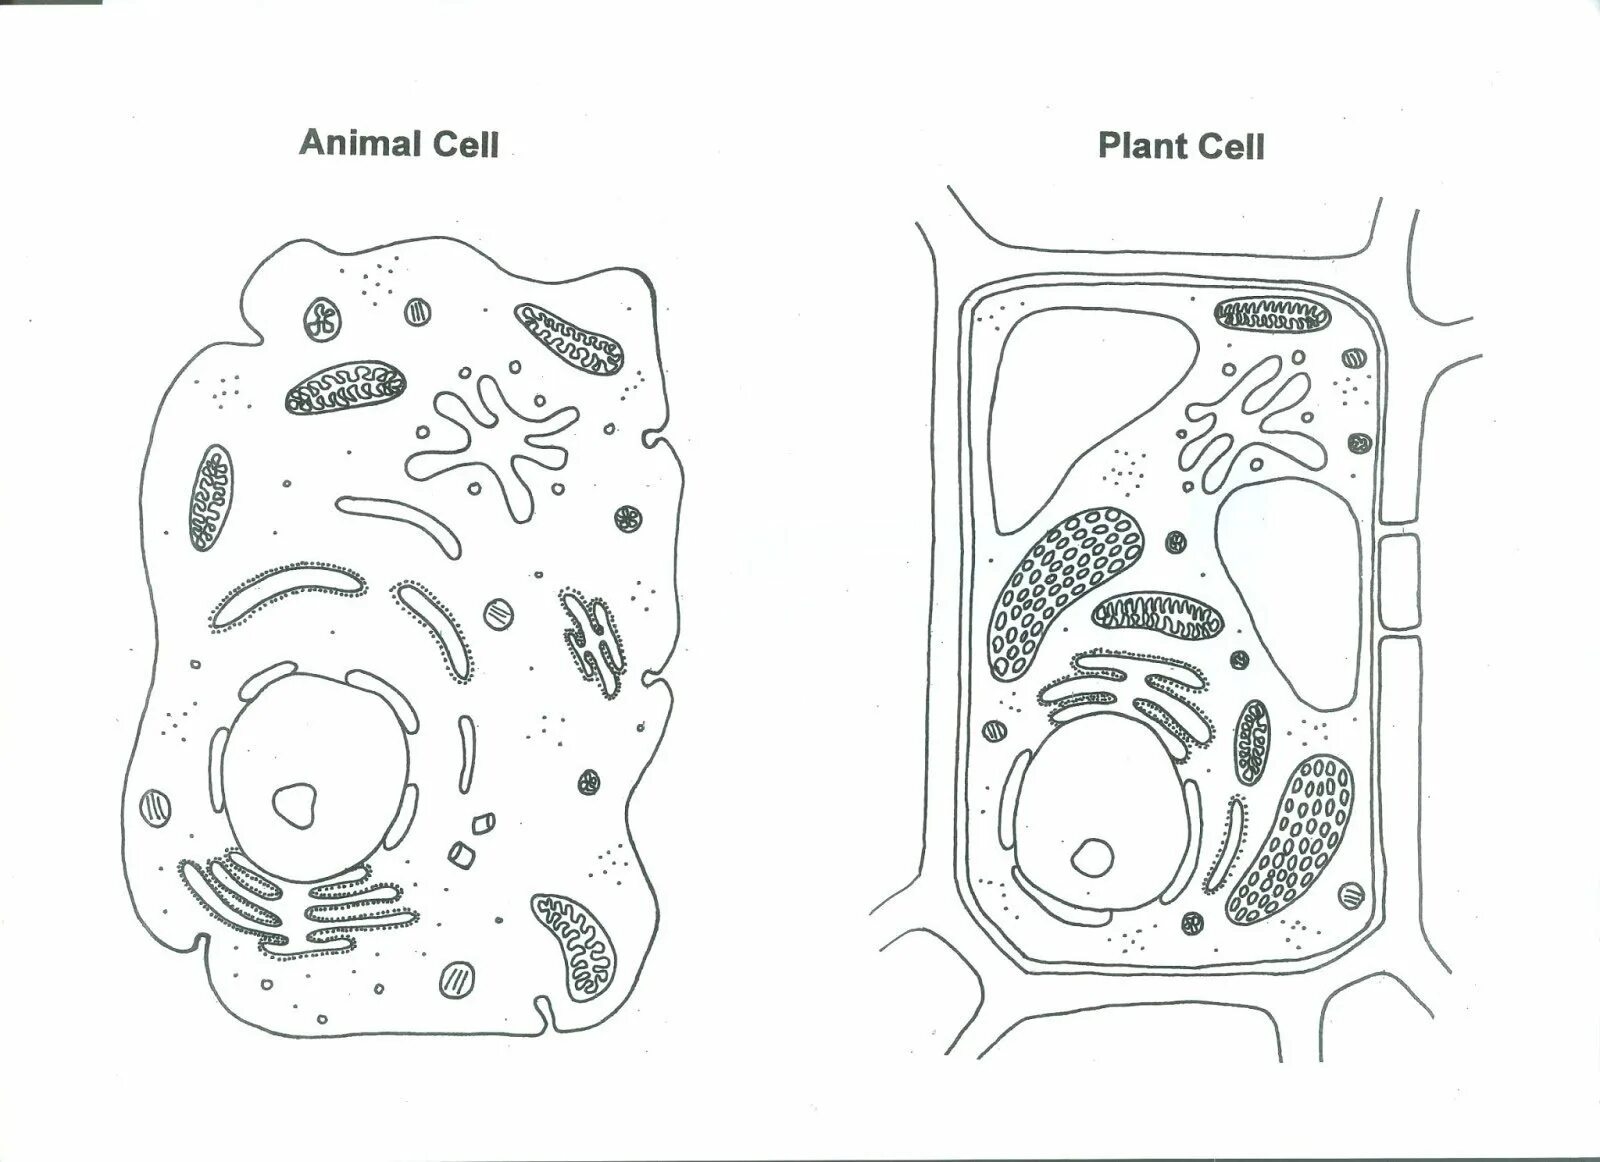 Plant cell #1